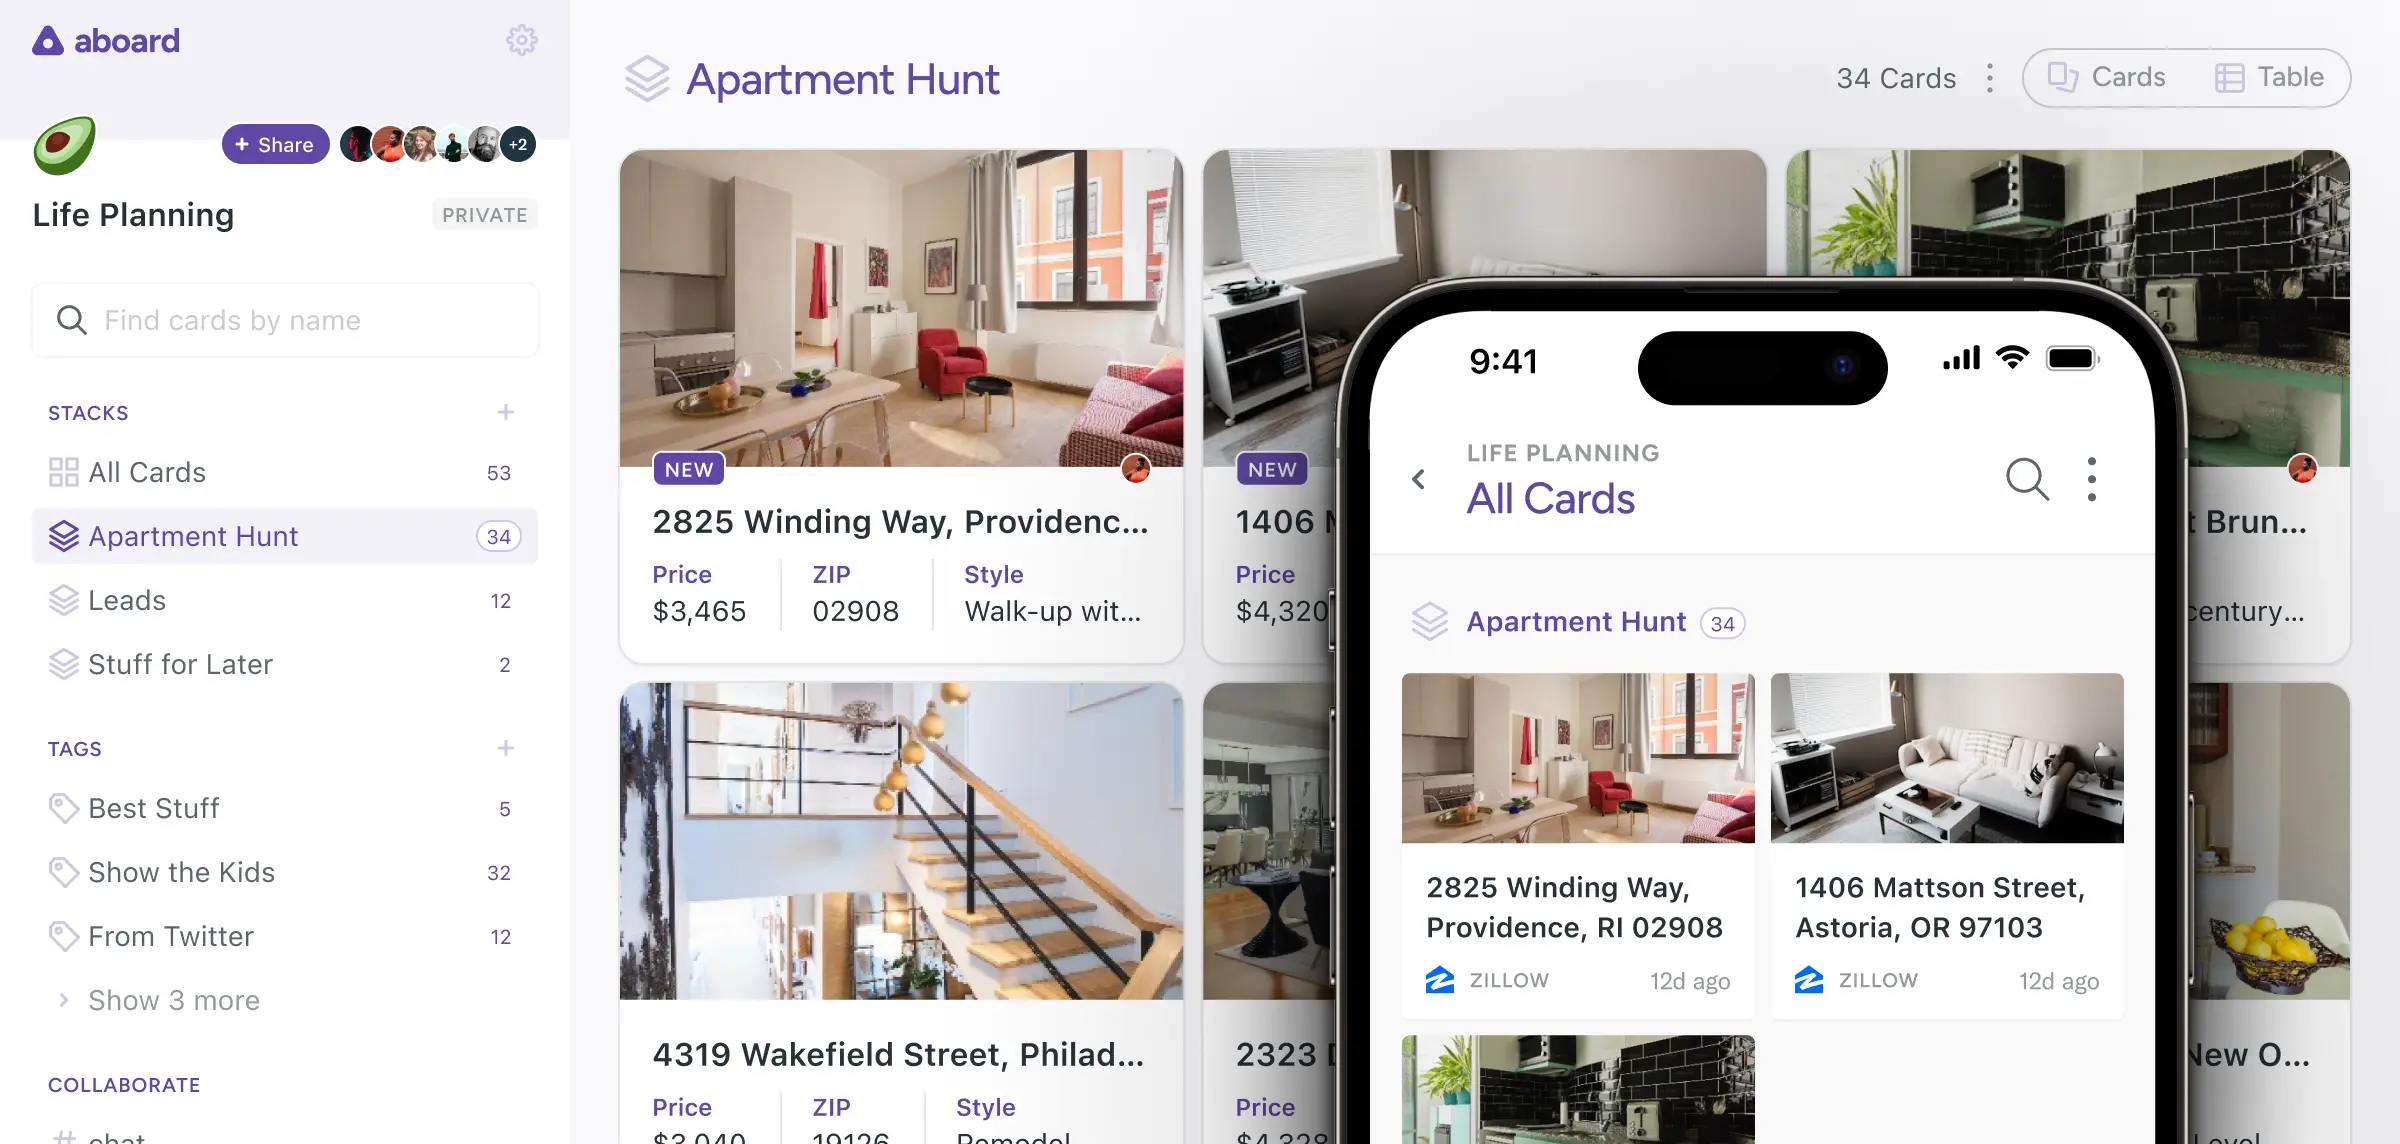 An image of an "Apartment Hunt" board, showing cards with different apartments, prices, and other data, plus options for chat. Everything is nicely organized.